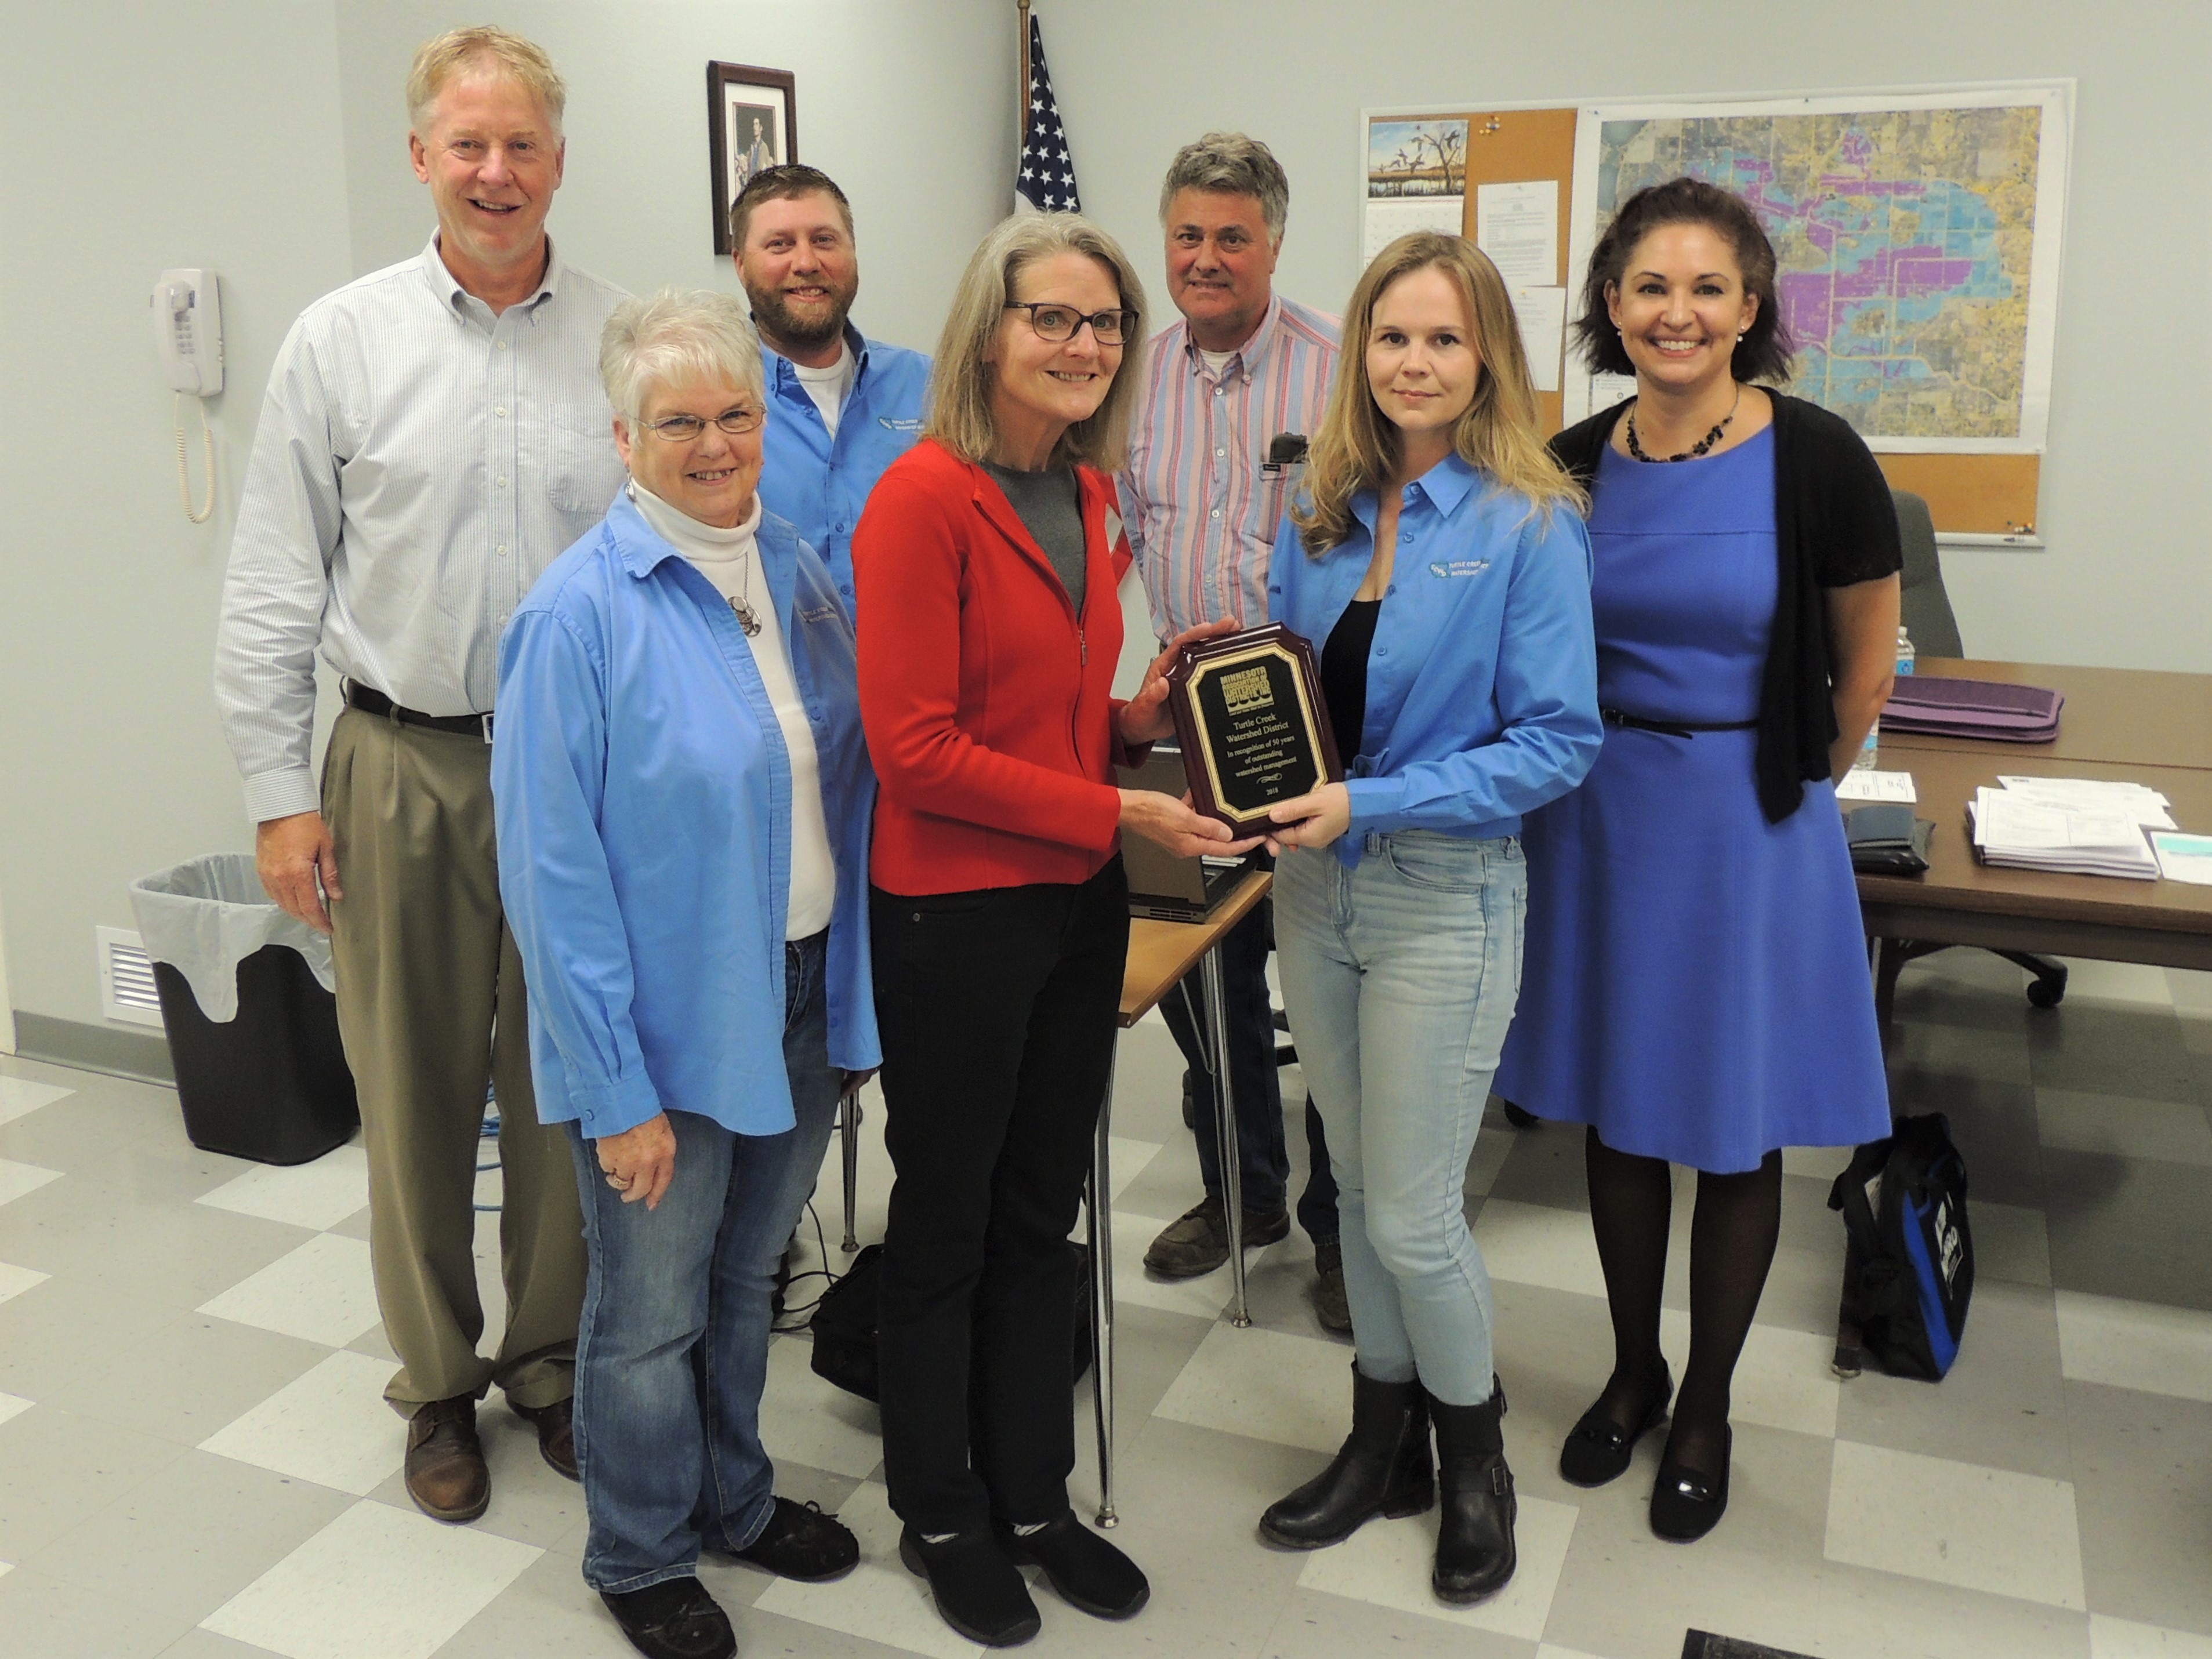 Minnesota Association of Watershed Districts (MAWD) board president Ruth Schaefer presents TCWD board chair Michelle Miller on May 21 with a plaque honring the district's 50th anniversary of water-management efforts. MAWD executive director Emily Javens (far right) along with TCWD board and staff are pictured as well. 
